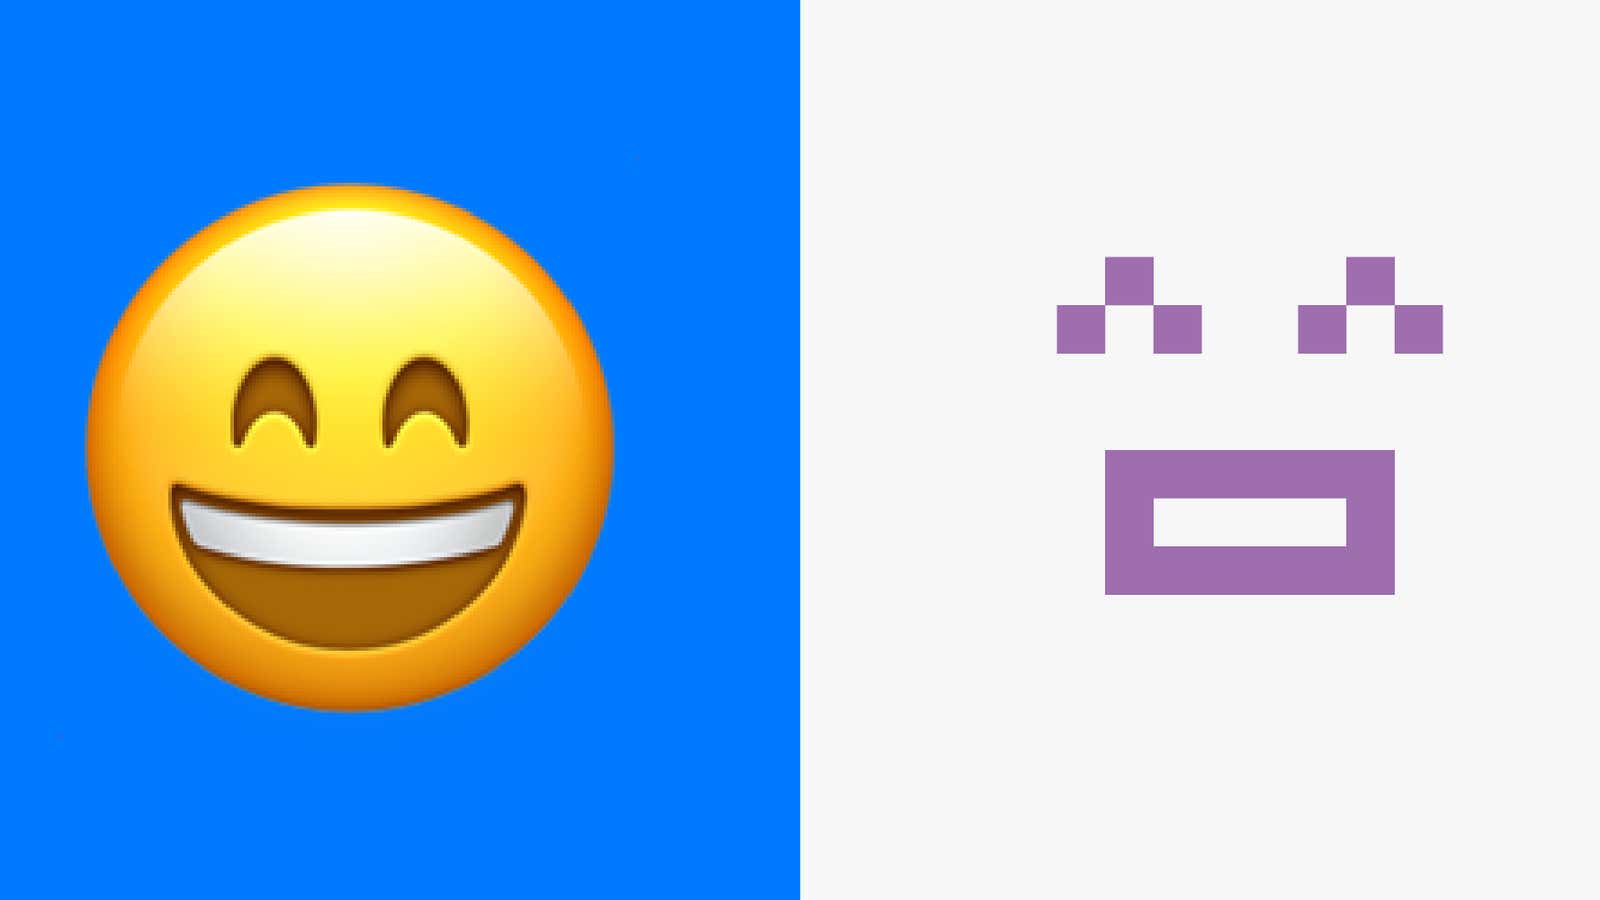 Today’s emoji originated from pixelated symbols designed for pagers